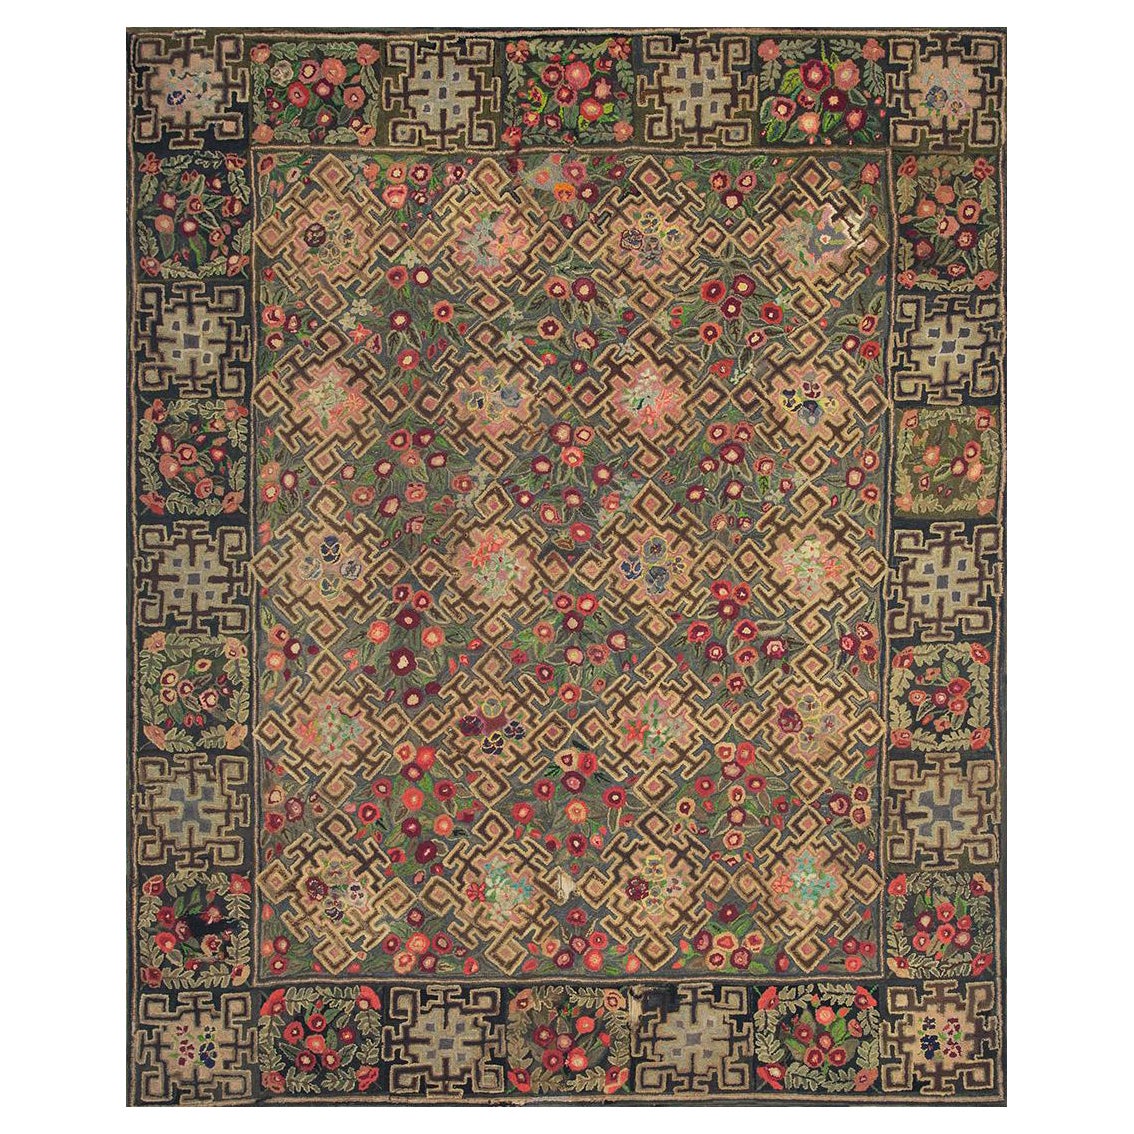 Early 20th Century American Hooked Rug 7' 3" x 9' 